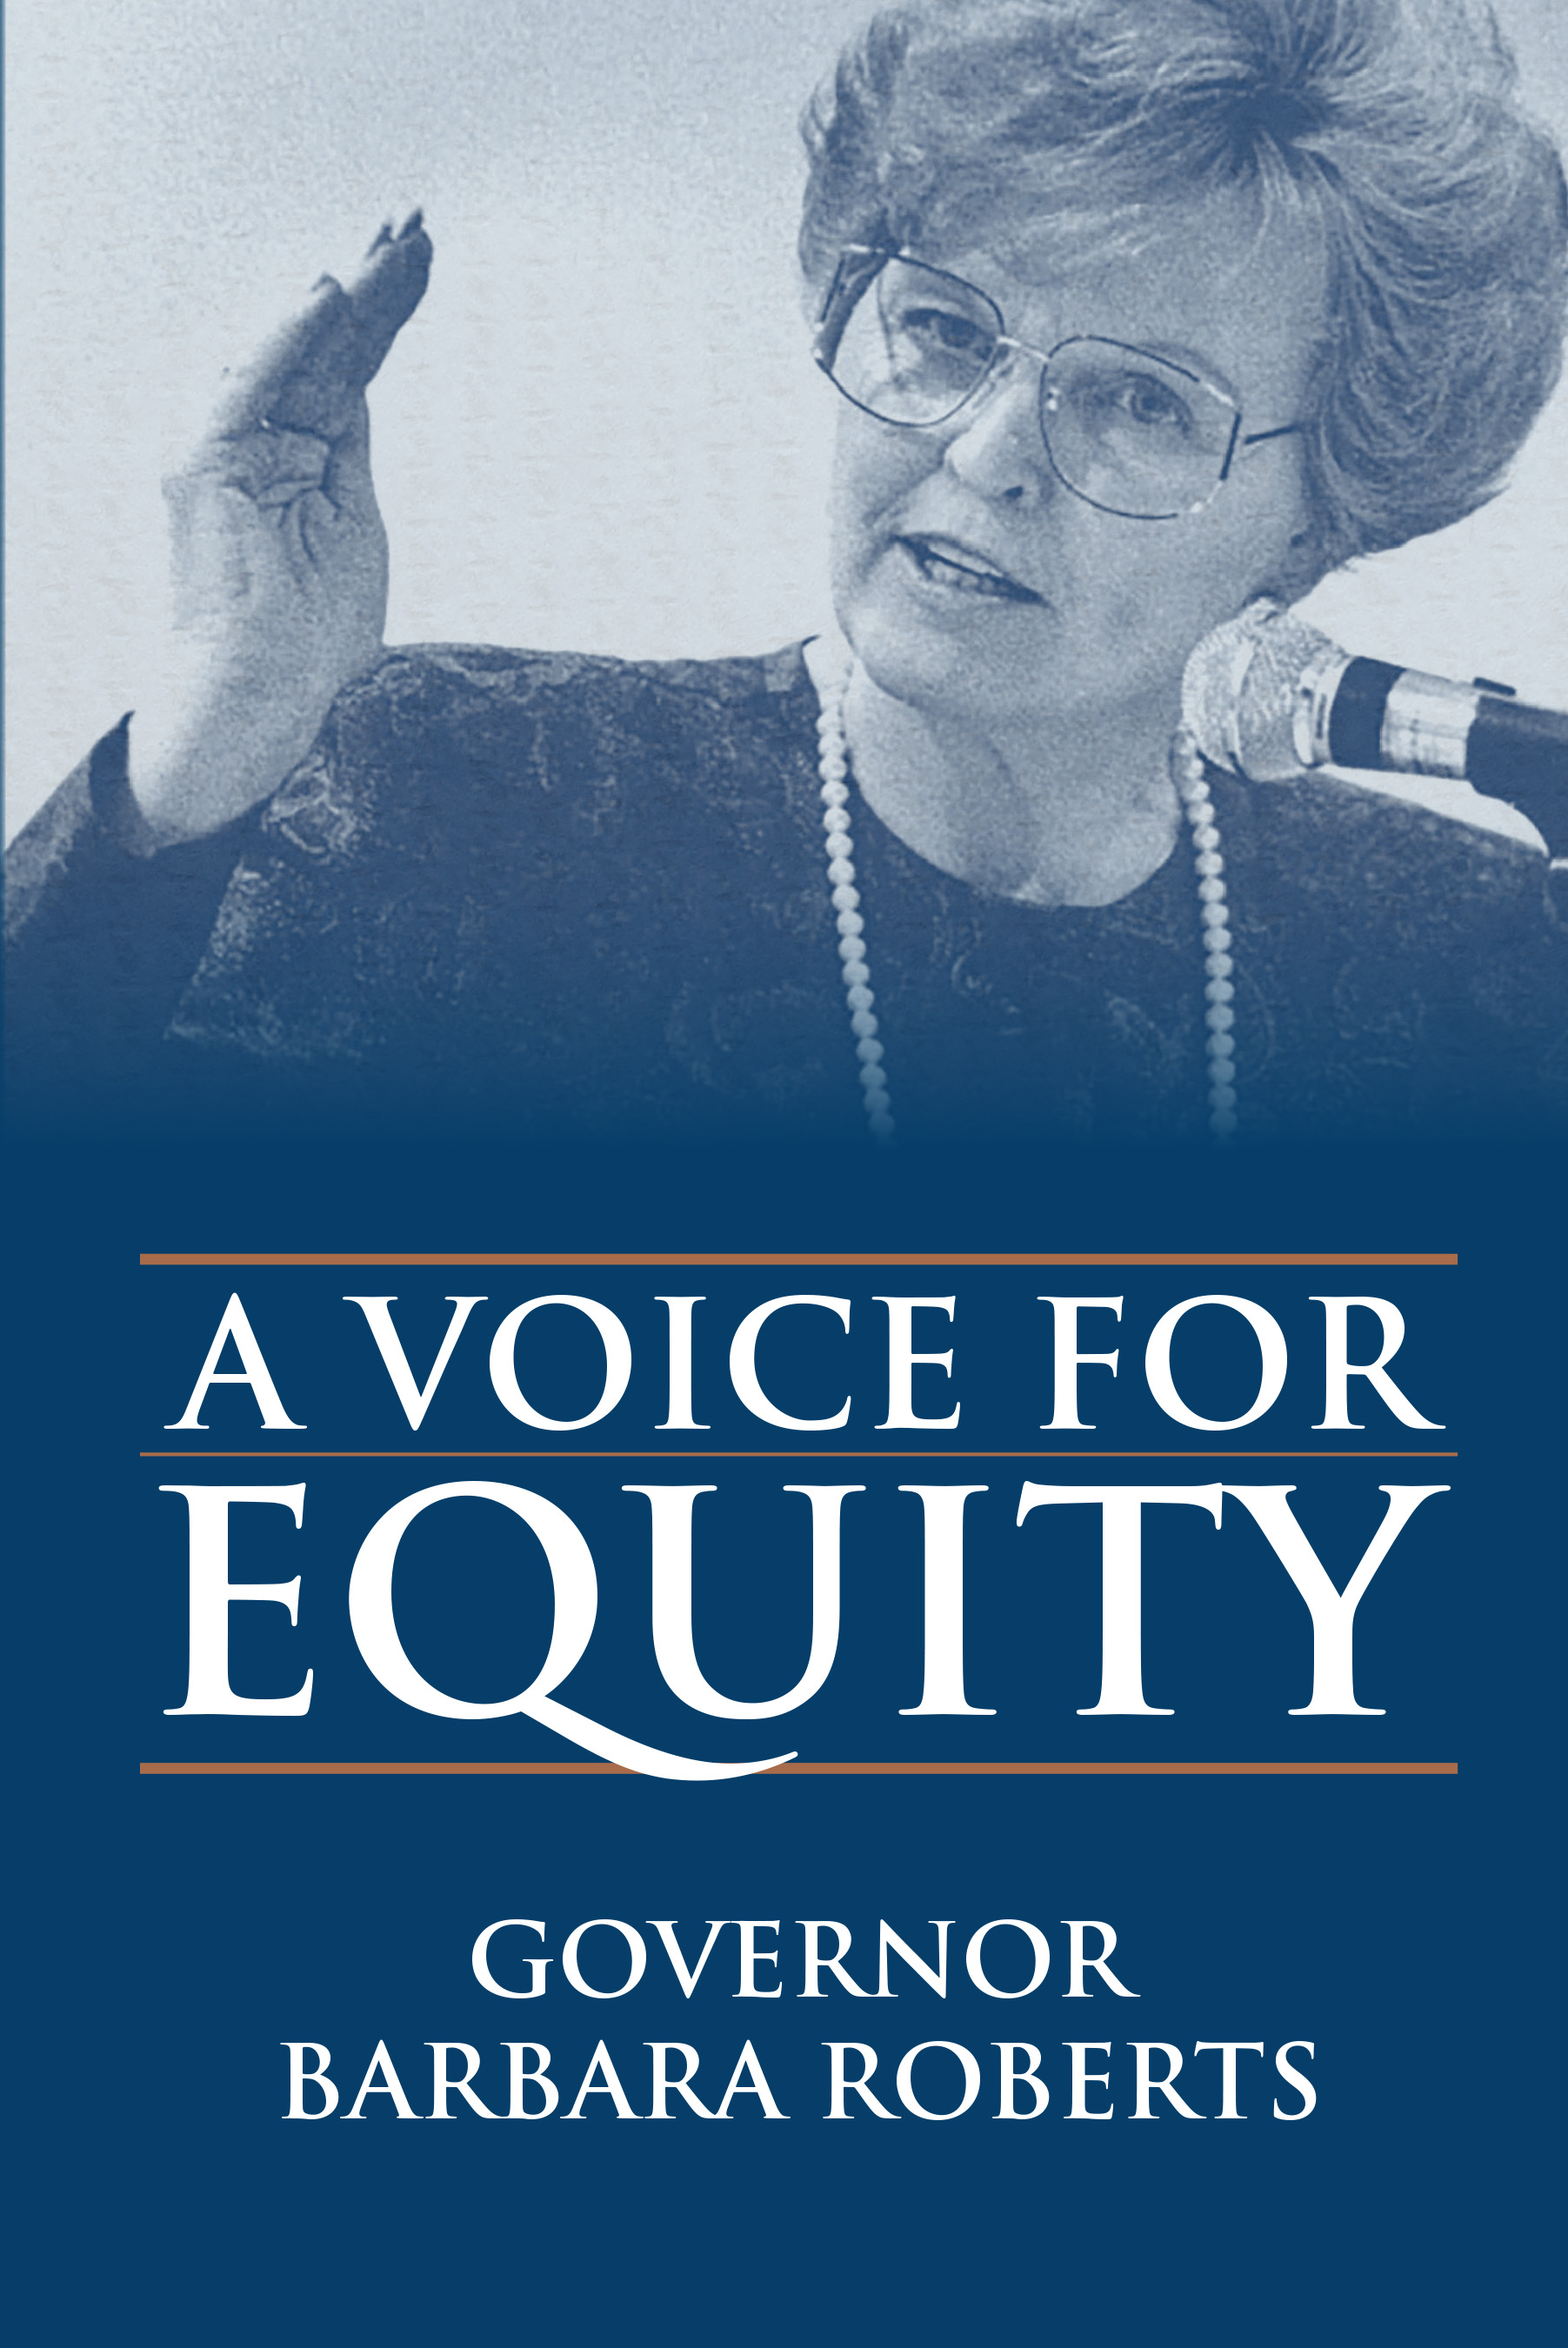 A Voice for Equity by Governor Barbara Roberts